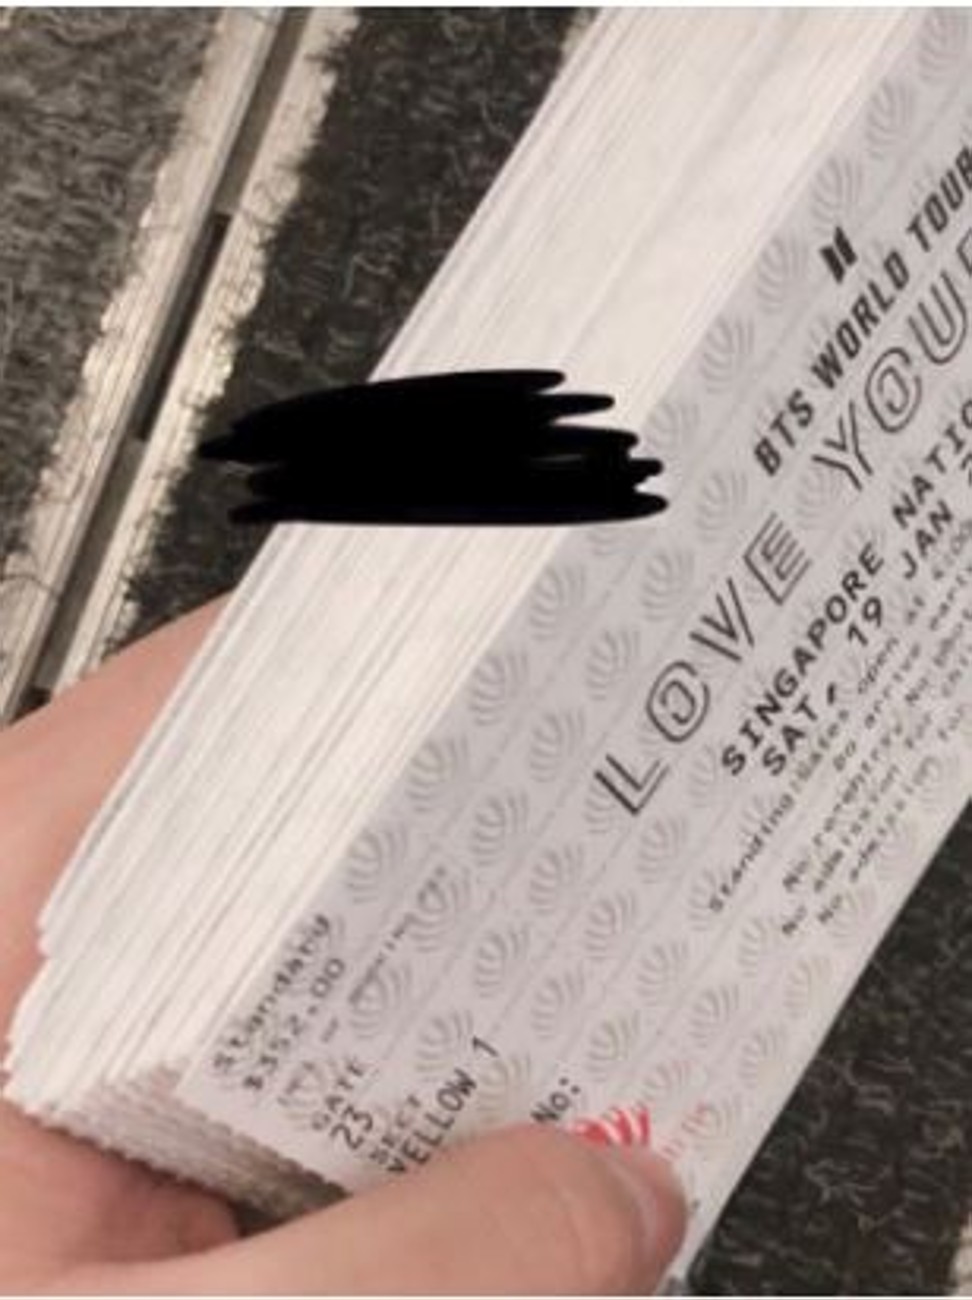 A pile of tickets reportedly being offered for resale at inflated prices. Photo: Twitter/minajoons